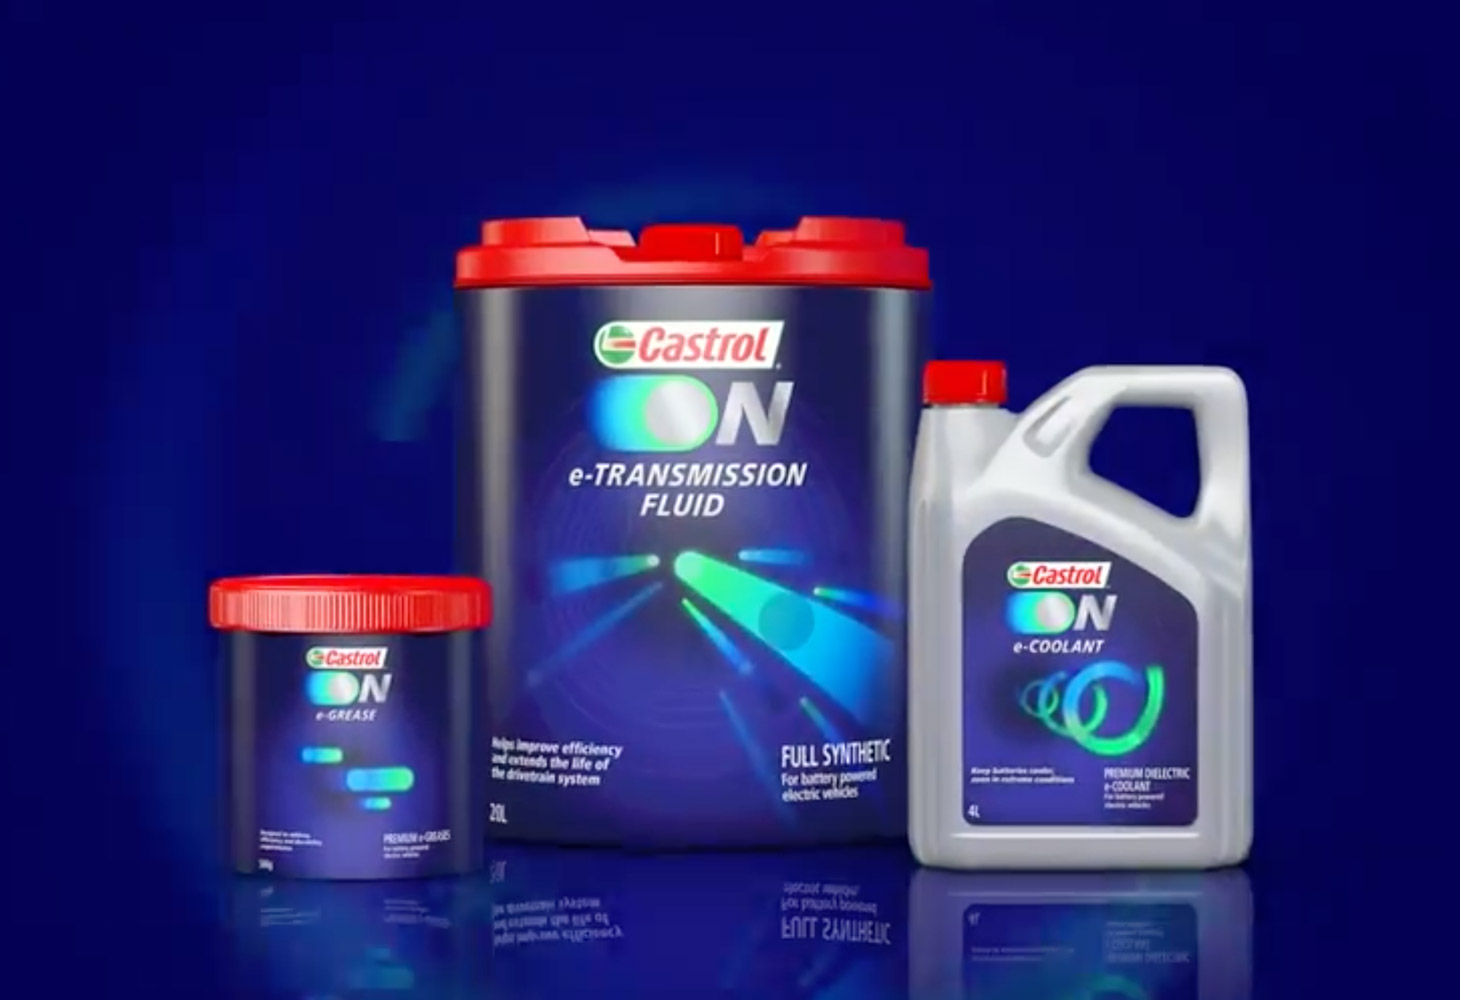 Castrol launches range of advanced fluids for electric vehicles